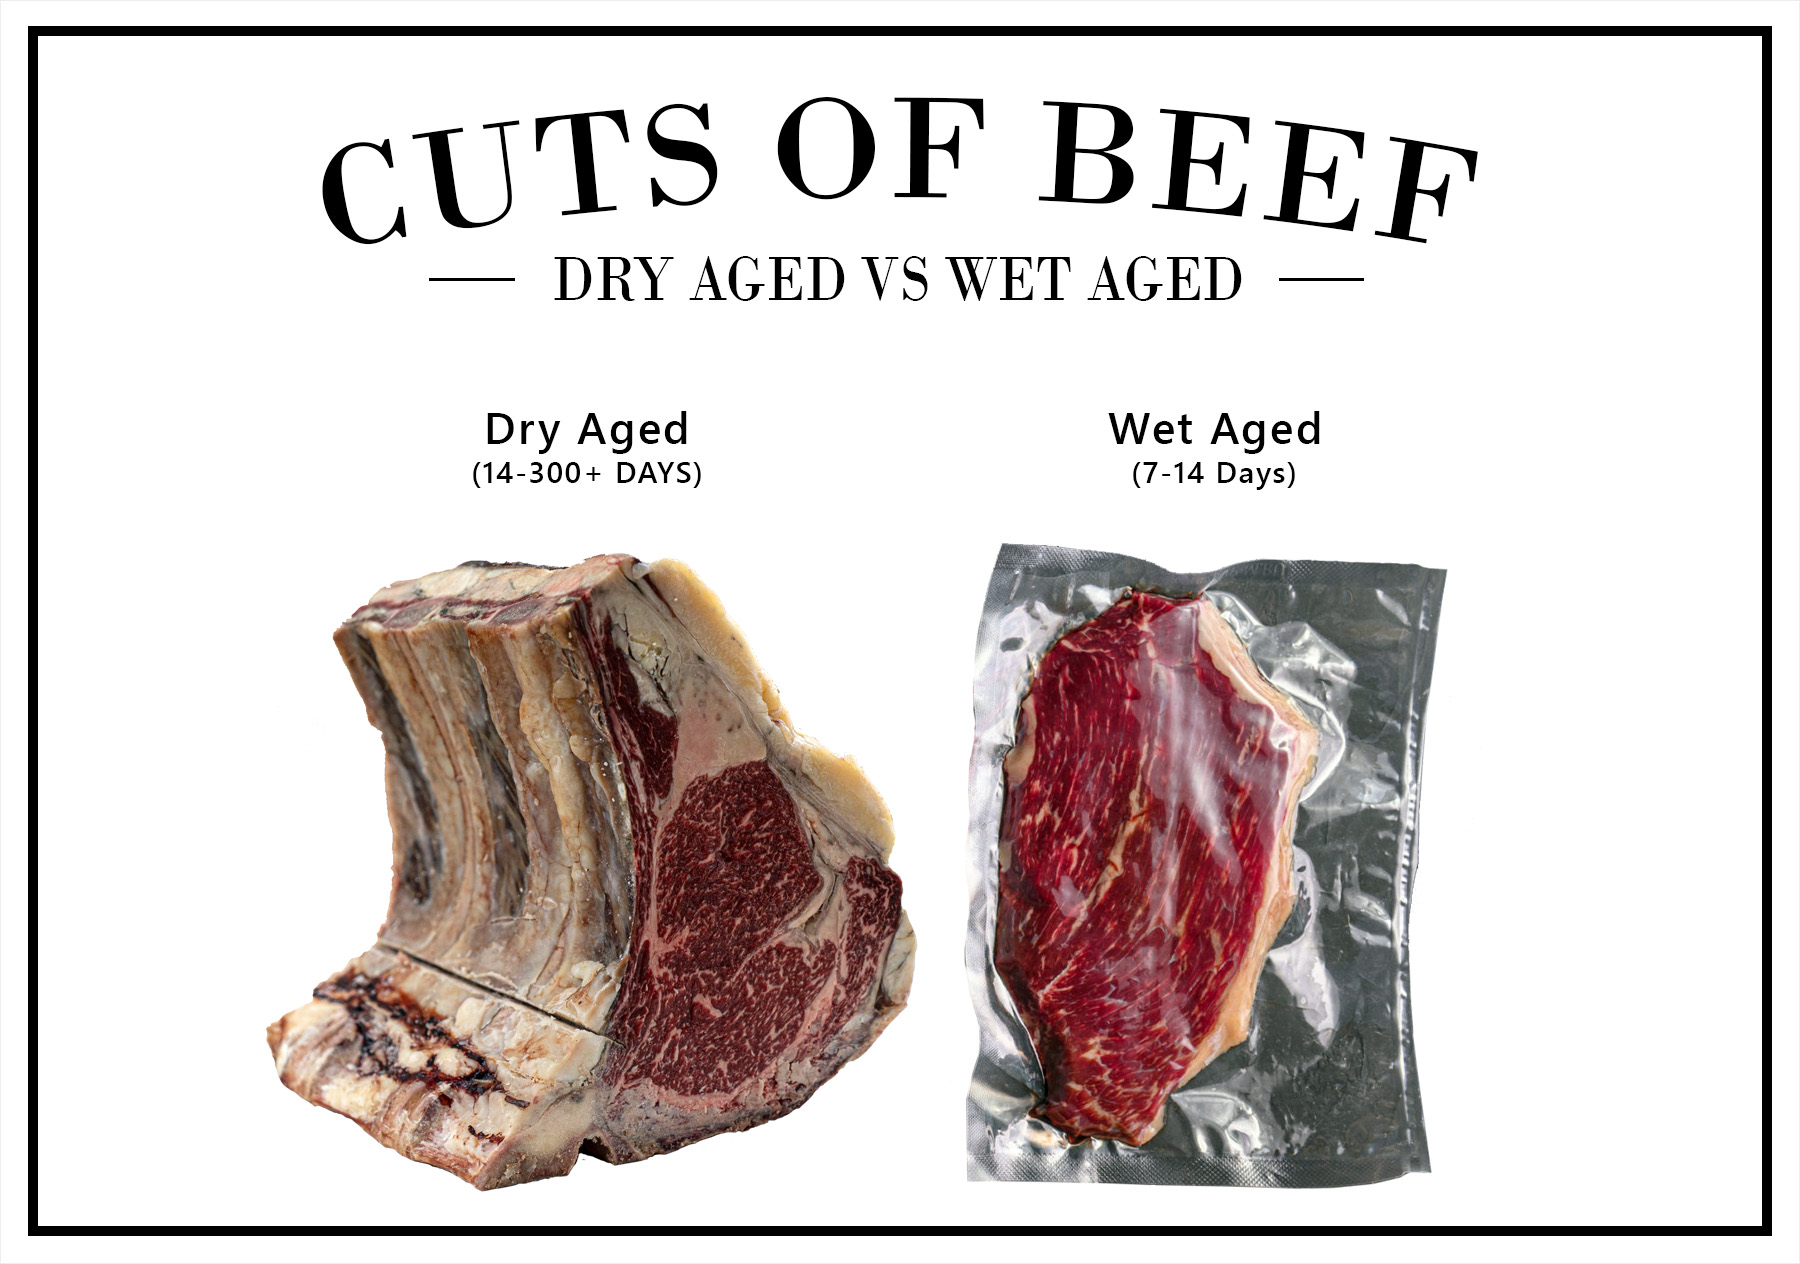 dry aged vs wet aged steak meats infographic 